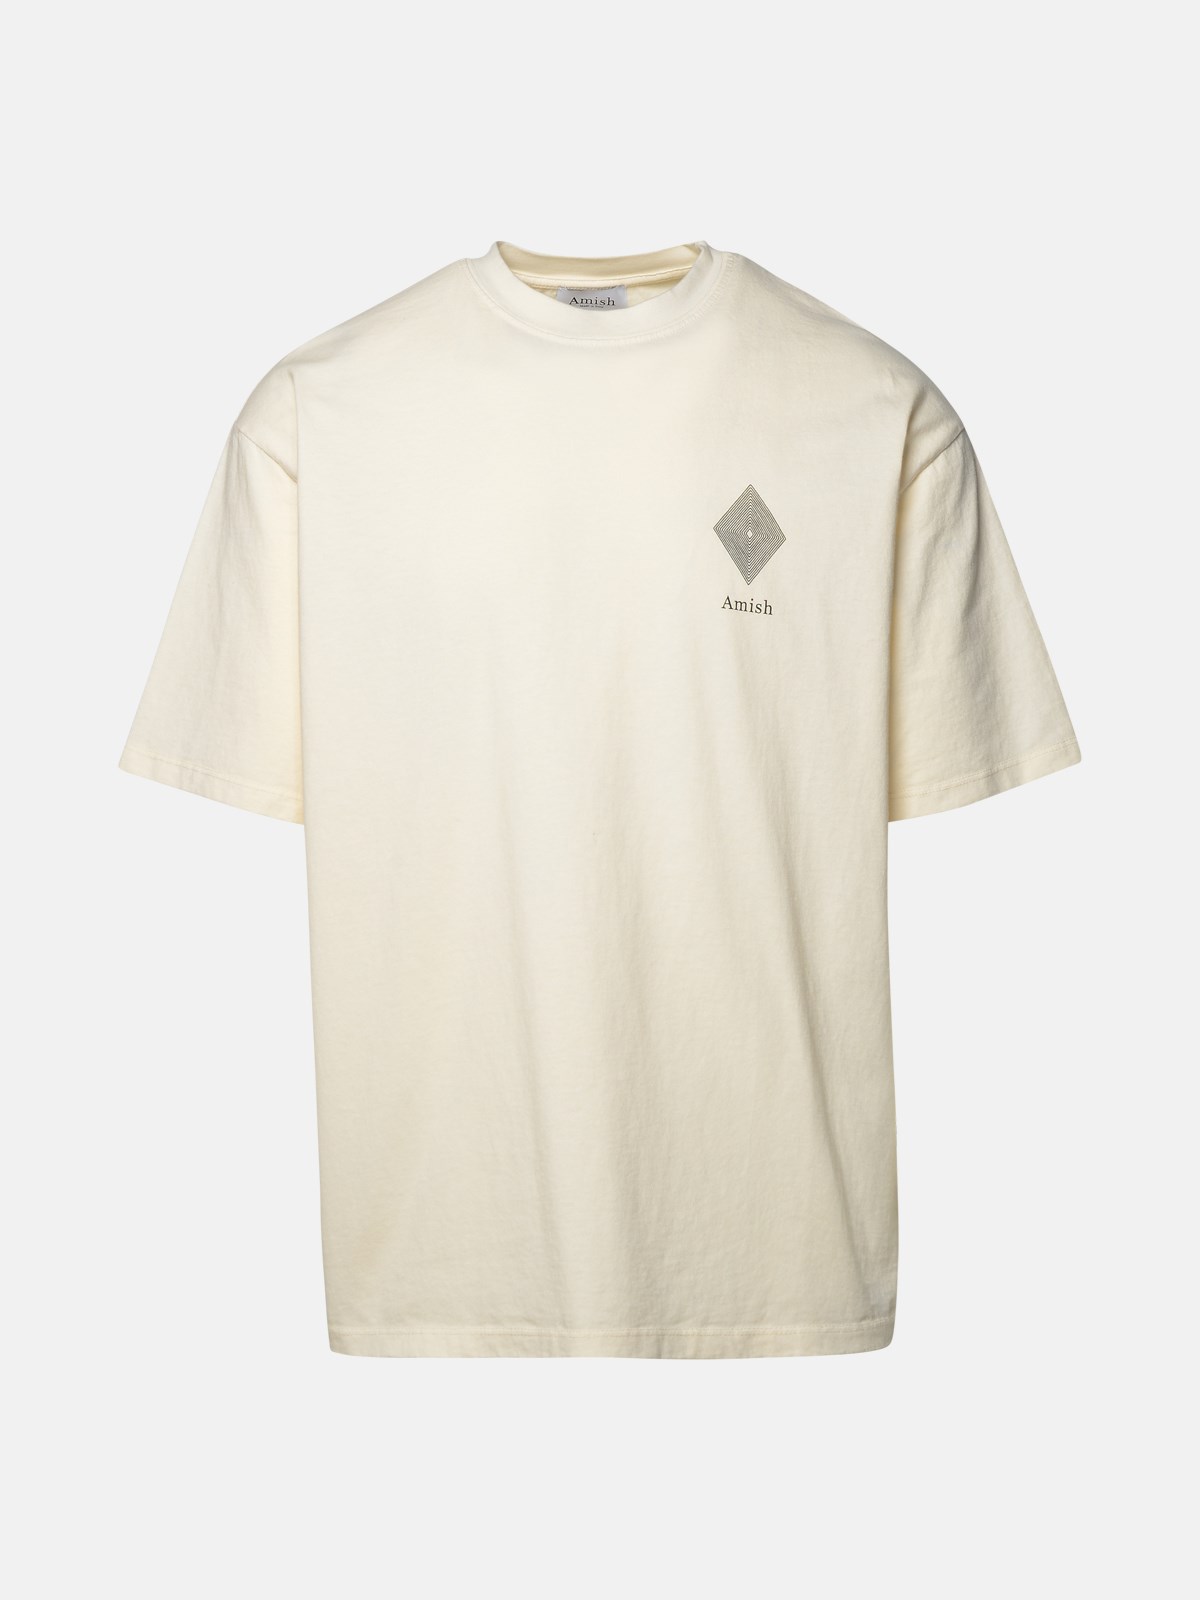 Amish White Cotton T-shirt In Ivory